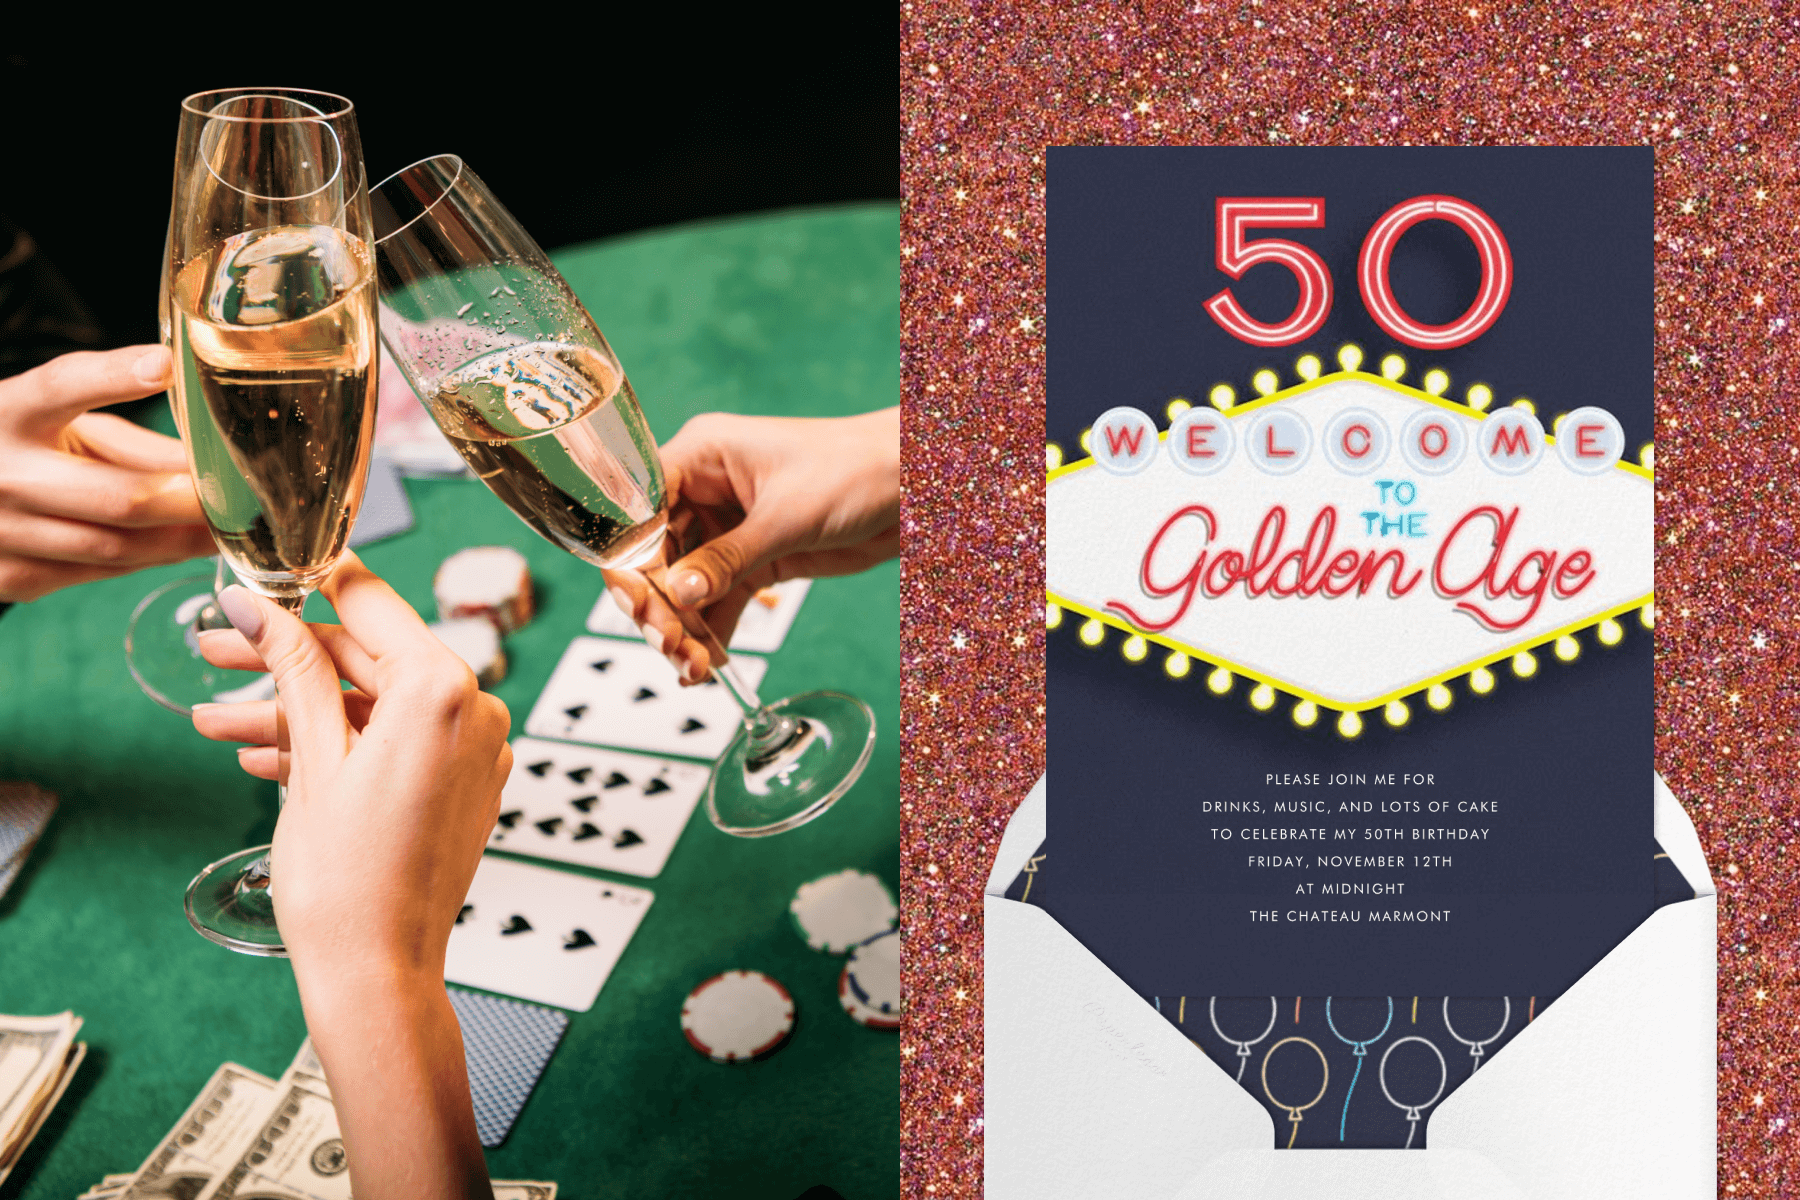 3 glasses of champagne being clinked together over a poker table; a casino-themed 50th birthday invitation.